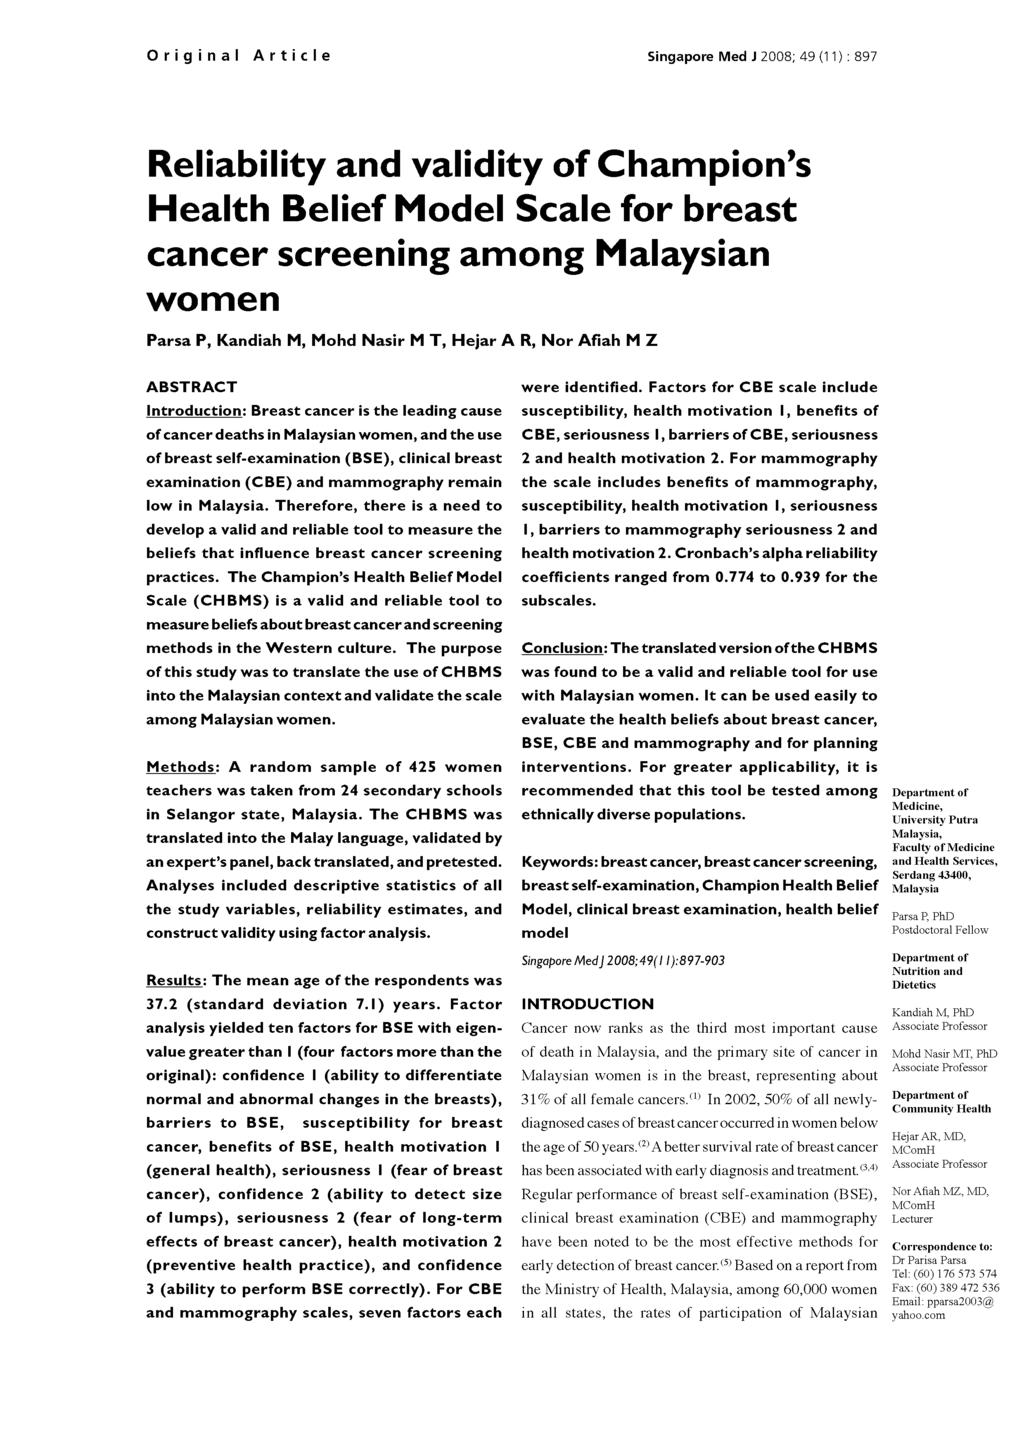 Original Article Singapore Med12008,49(11):897 Reliability and validity of Champion's Belief Model Scale for breast cancer screening among Malaysian women Parsa P, Kandiah M, Mohd Nasir M T, Hejar A